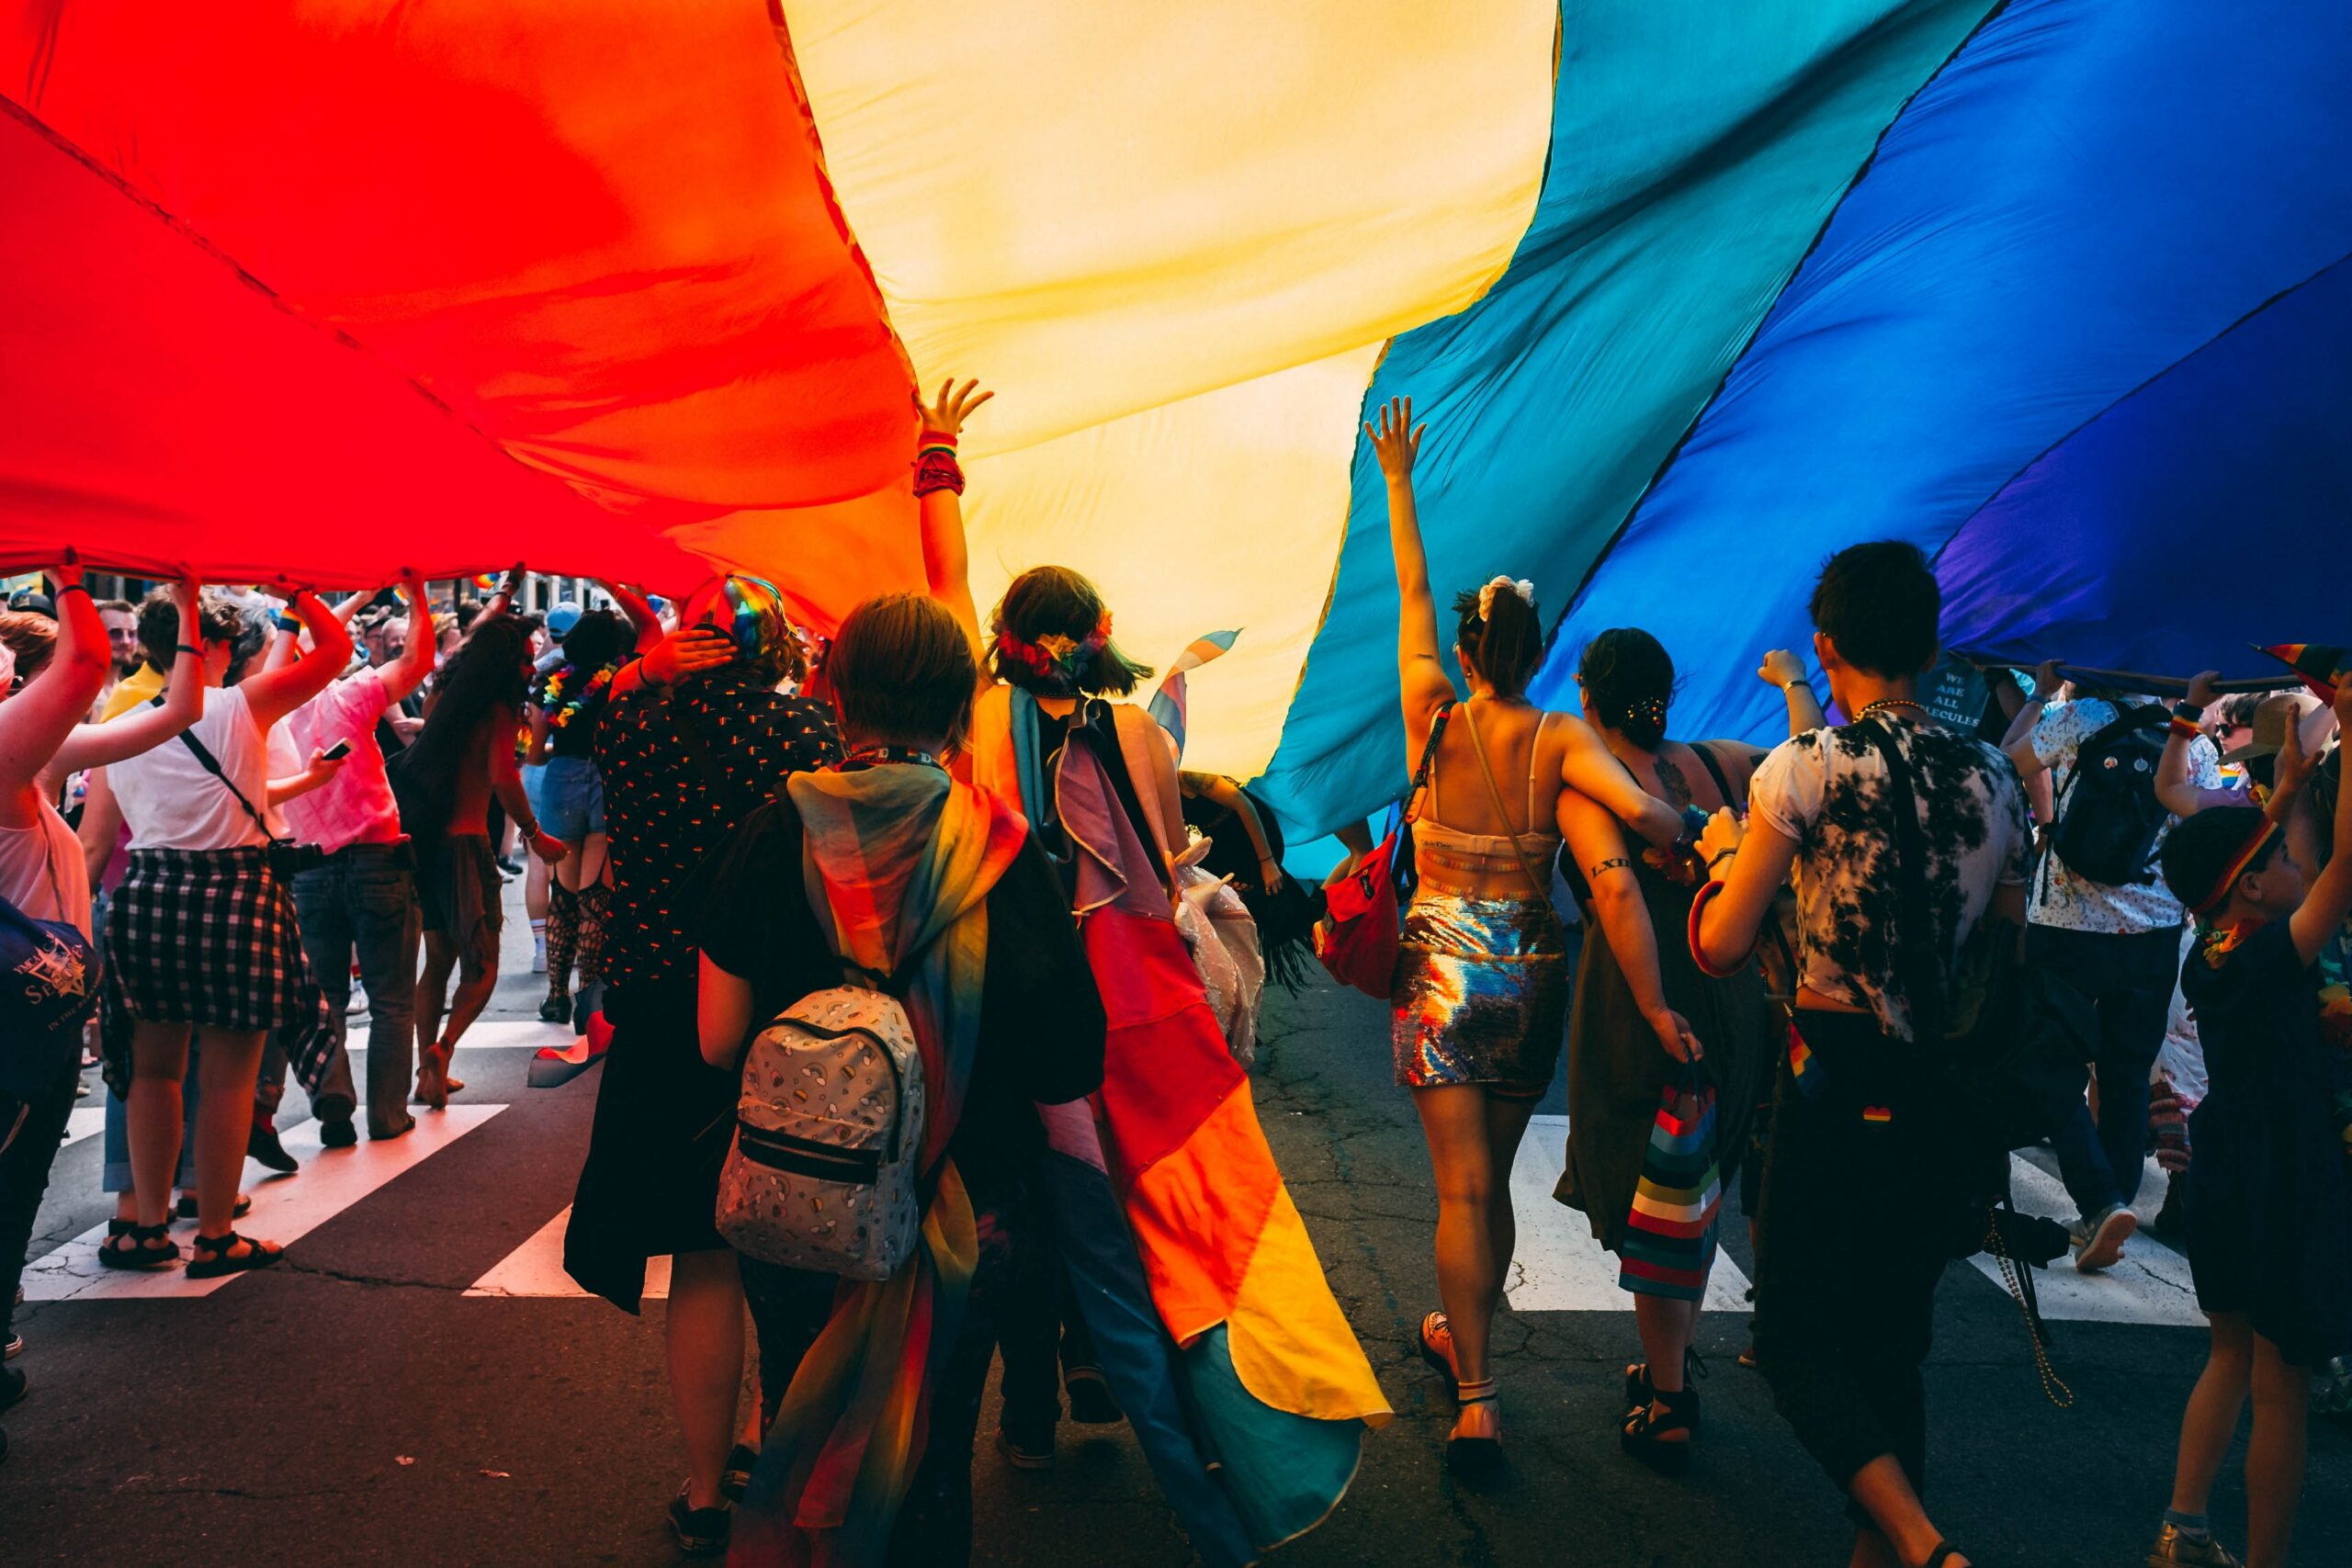 A group of people walking together under a rainbow flag